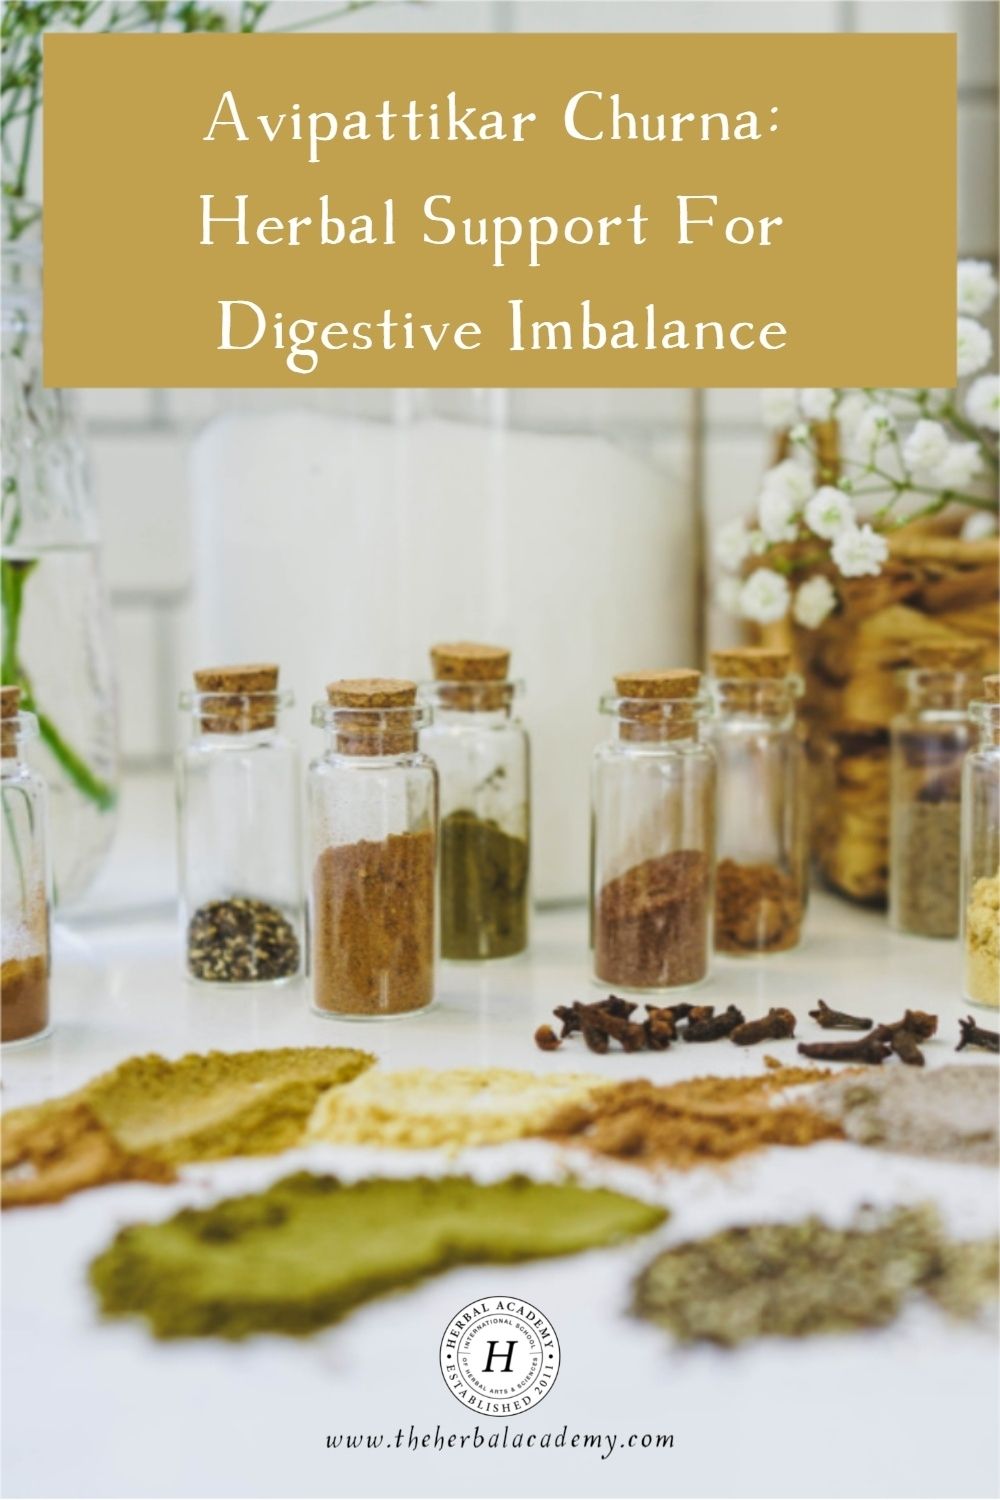 Avipattikar Churna: Herbal Support For Digestive Imbalance | Herbal Academy | Avipattikar churna, a classic ayurvedic herbal formula, is tasty and practical. If you or a loved one experiences any of the pitta-type digestive issues mentioned, this may be a wonderful formula to keep in stock.